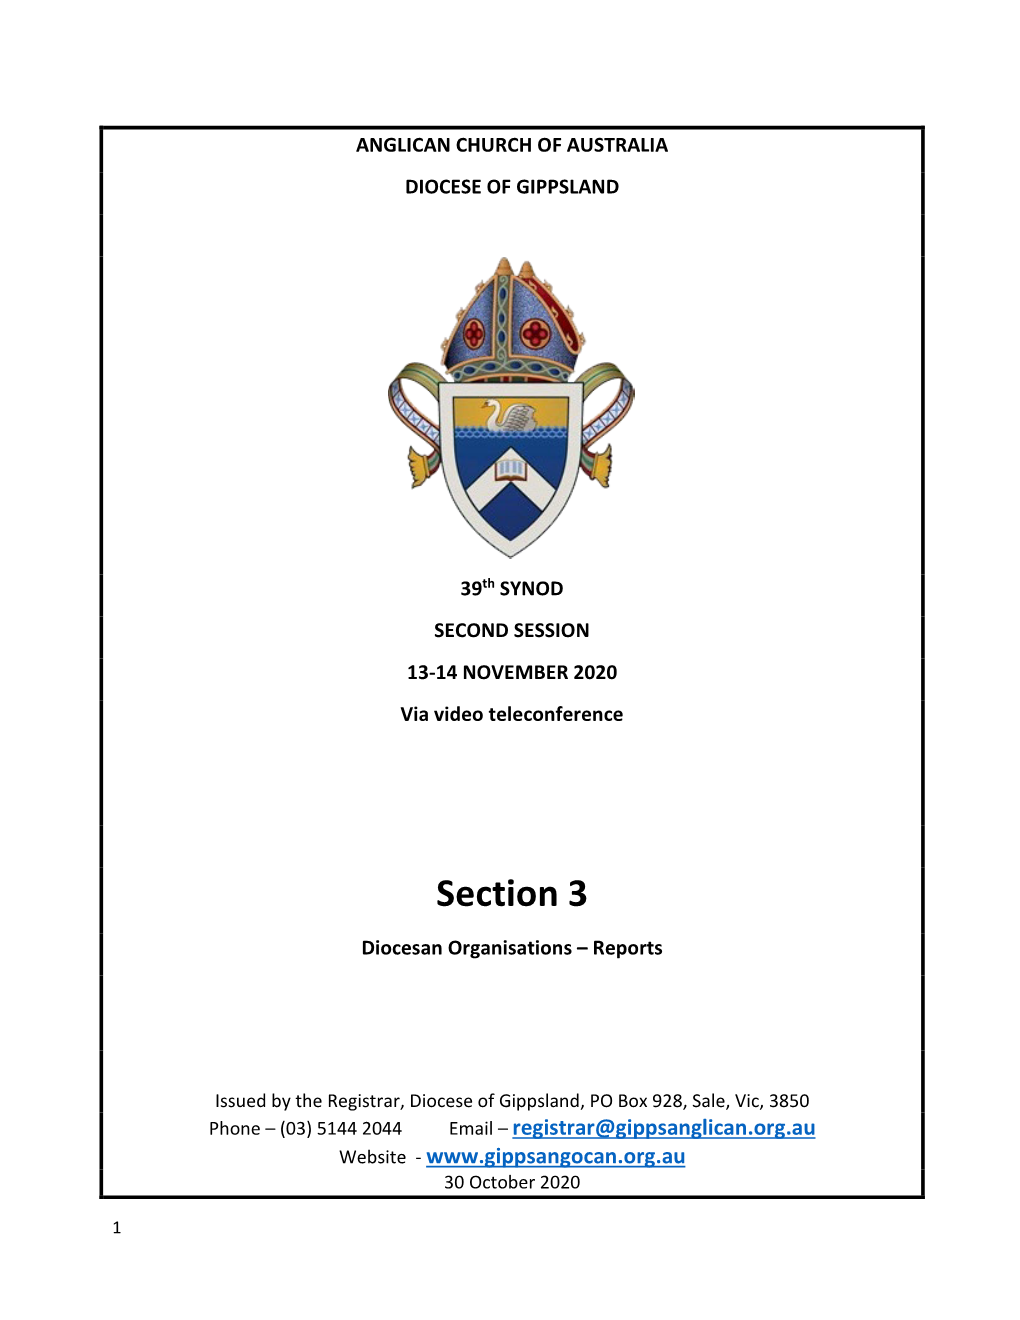 Section 3 Diocesan Organisations – Reports